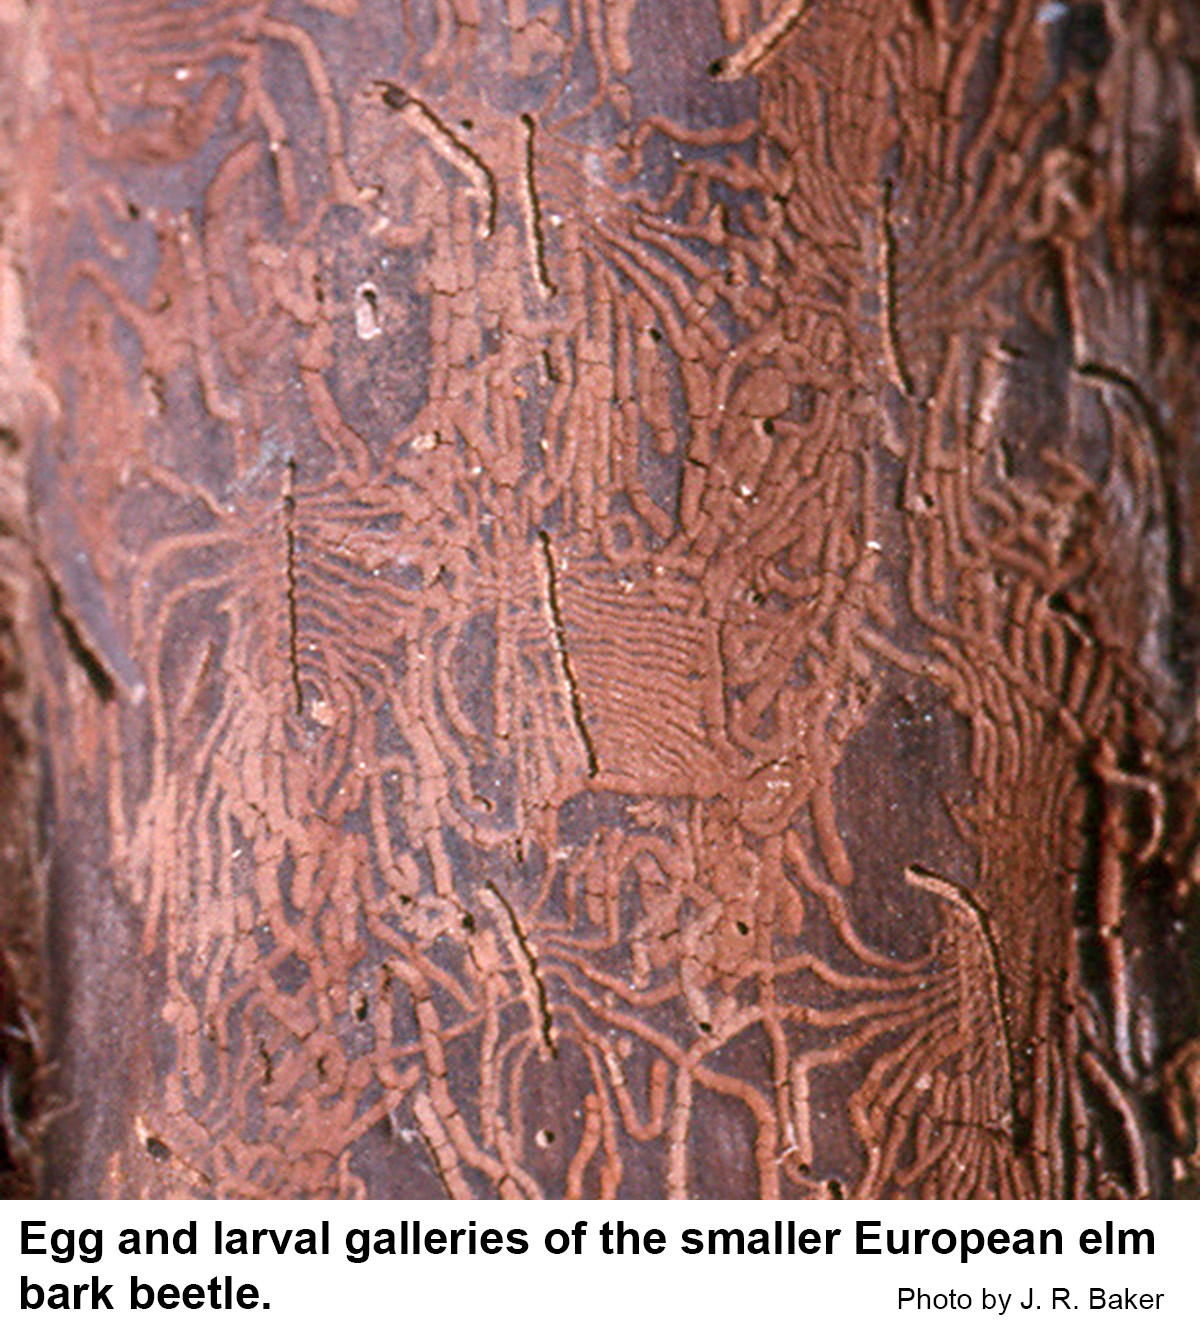 Egg galleries (with the grain) and larval galleries (across grai